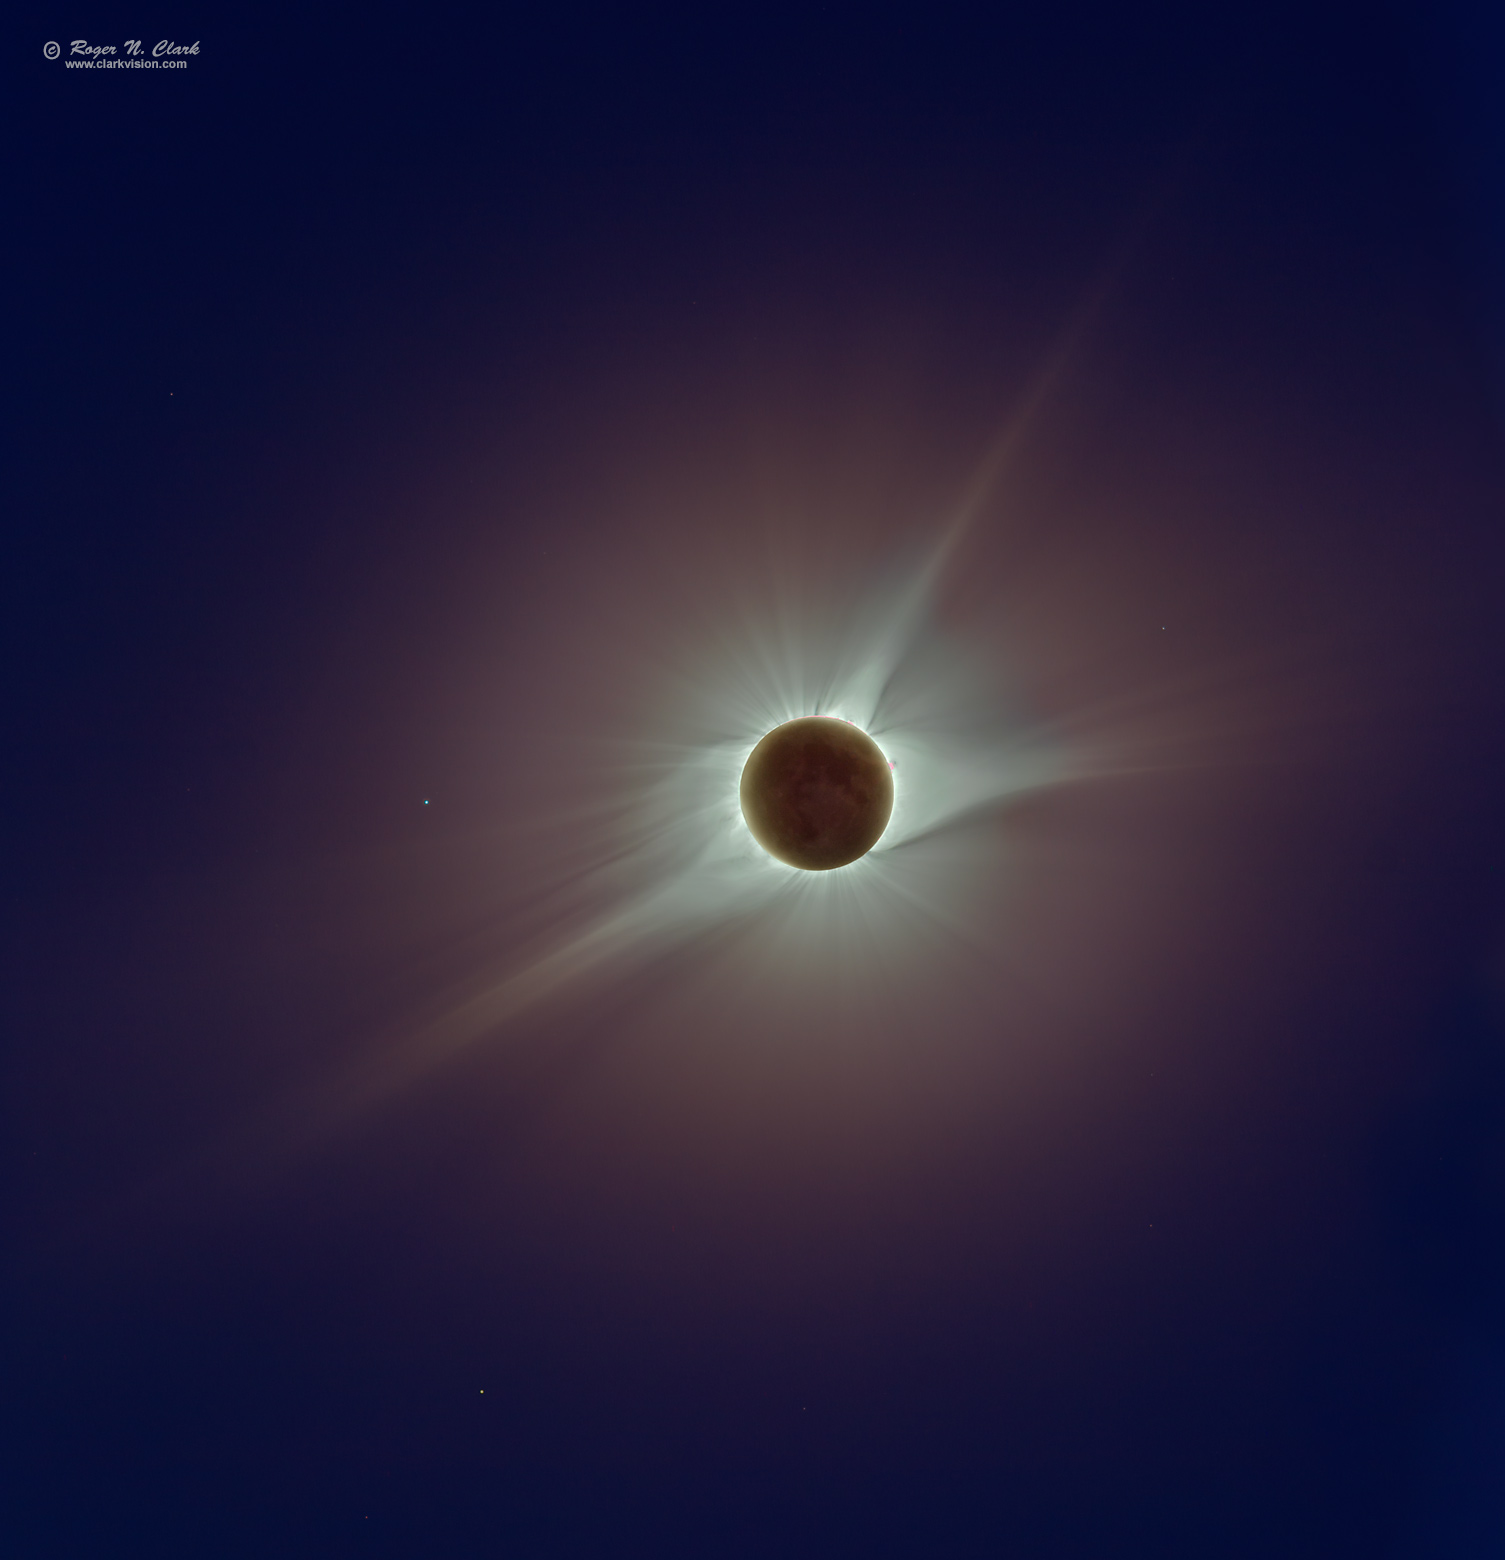 image solar-eclipse-total-rnclark-200+700mm.c08.21.2017.c-c1se0.5xs.jpg is Copyrighted by Roger N. Clark, www.clarkvision.com